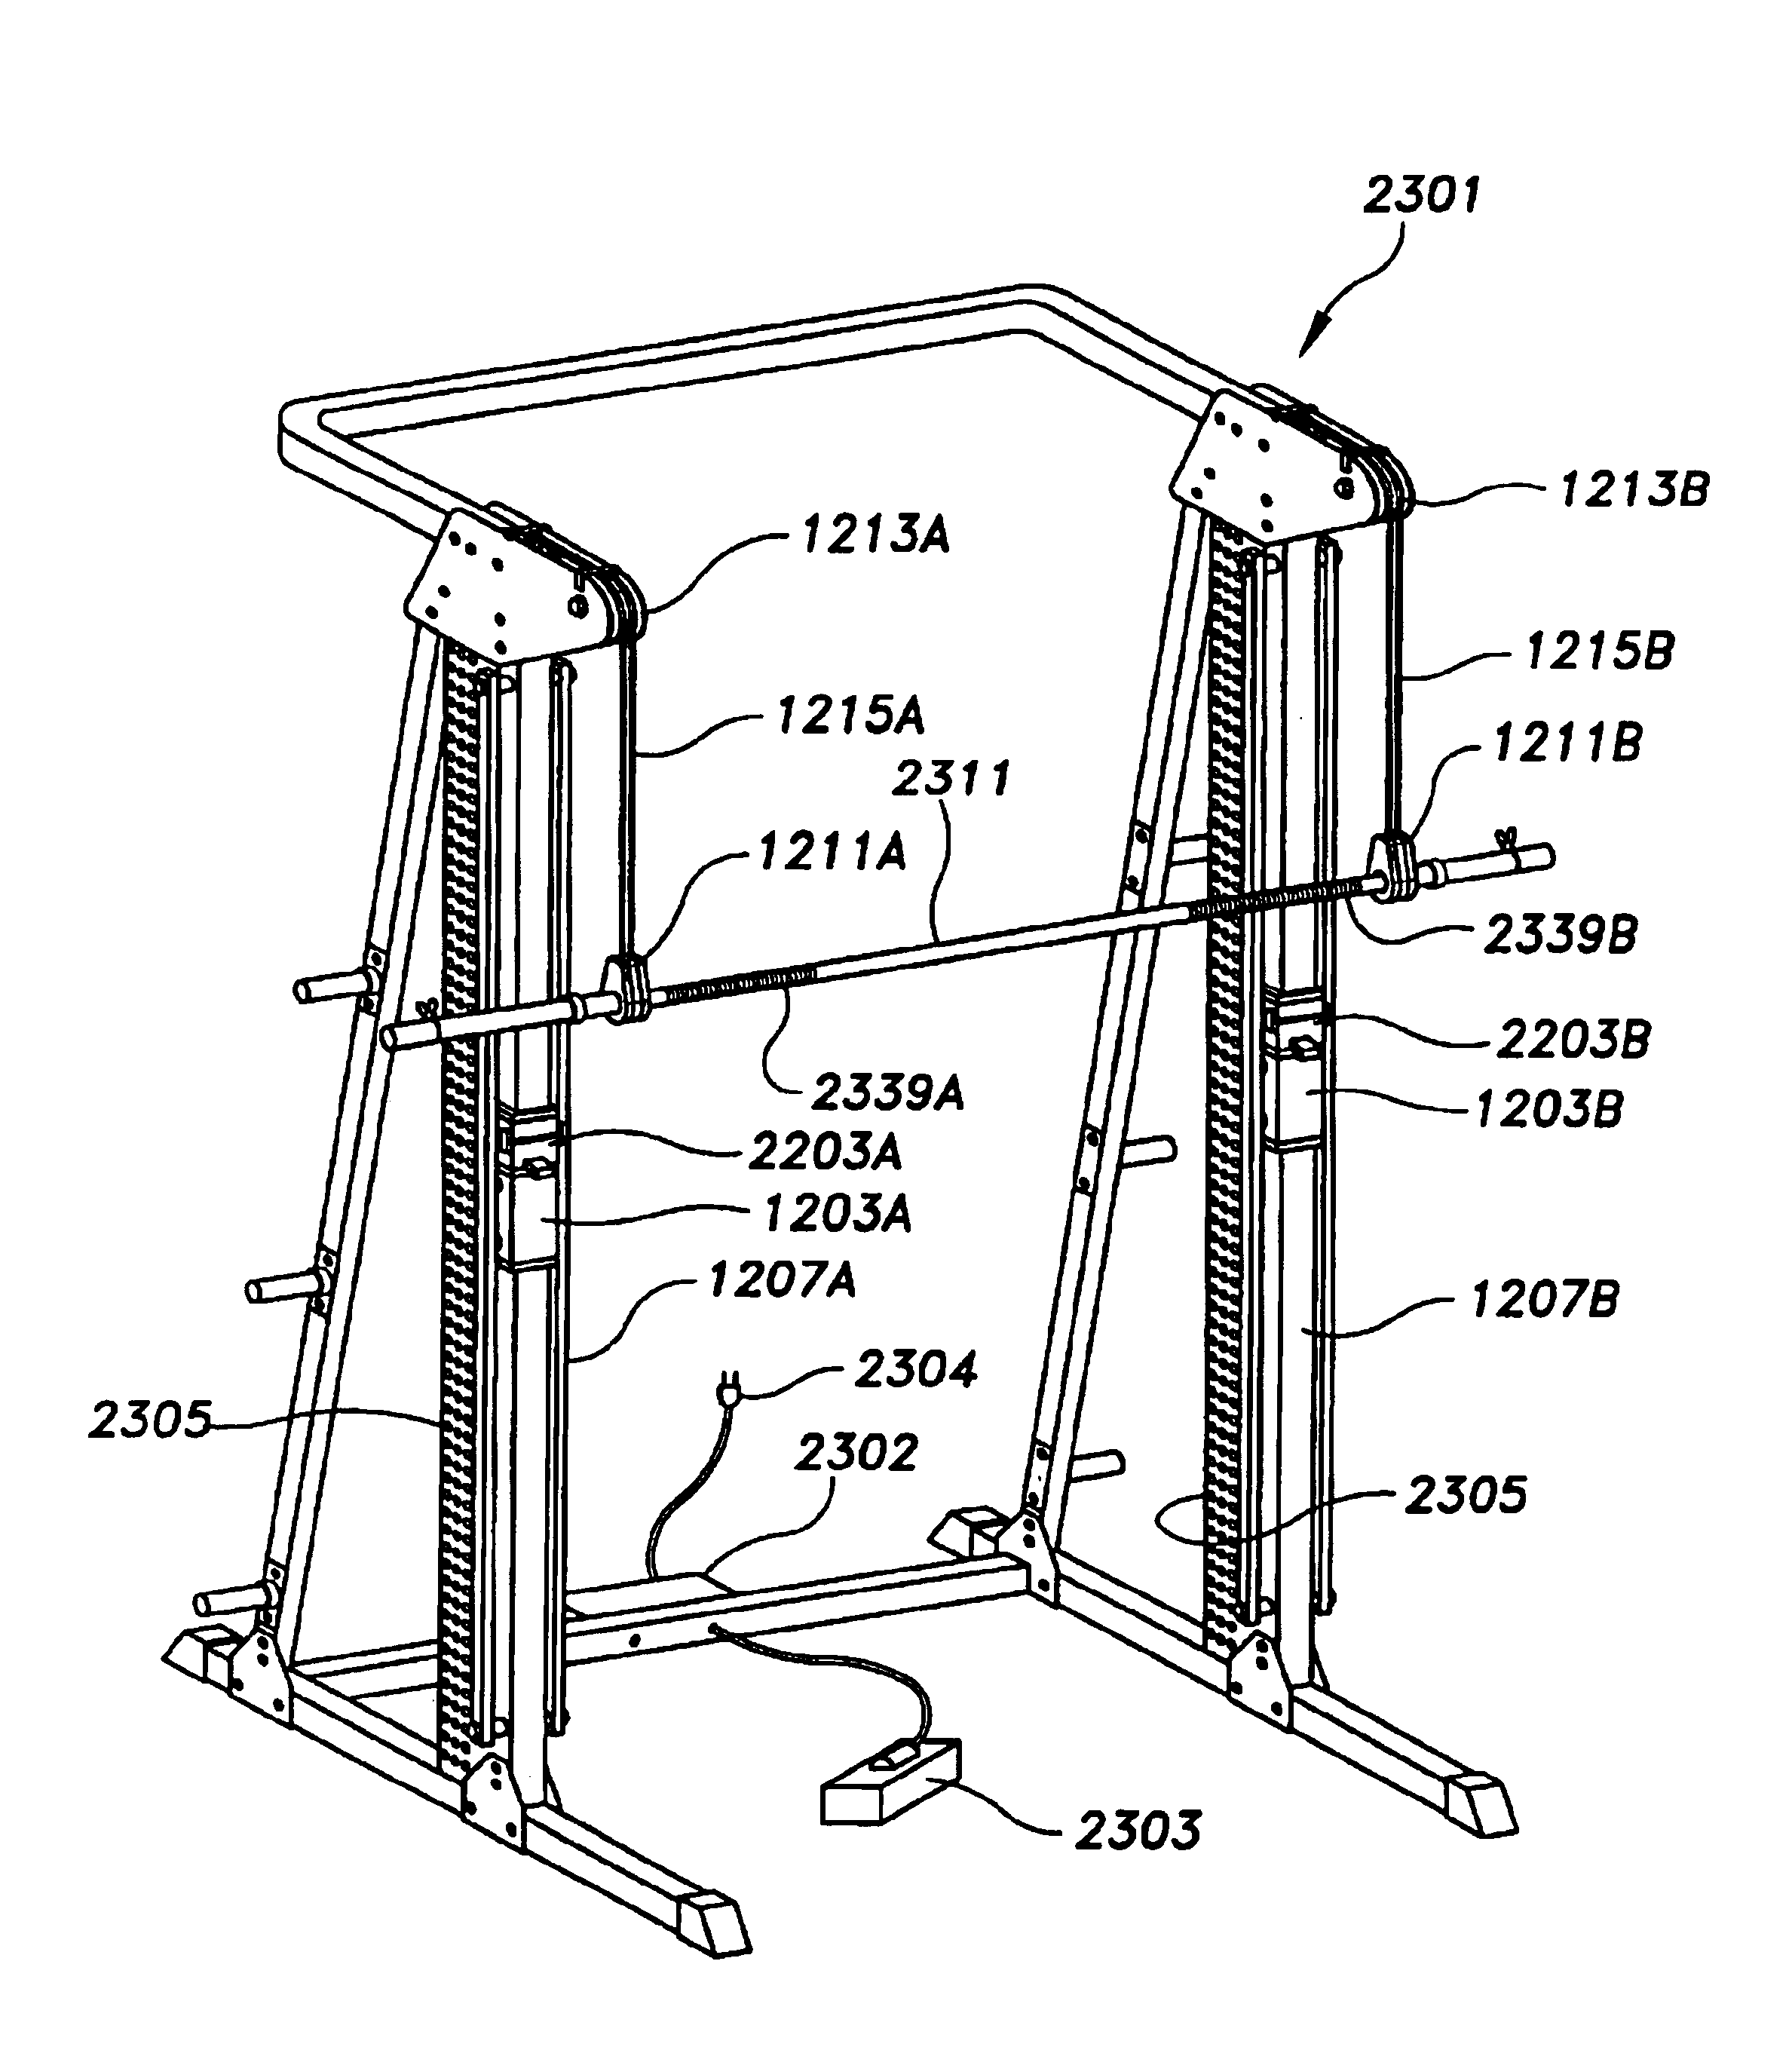 Self-spotting apparatus for free-weights